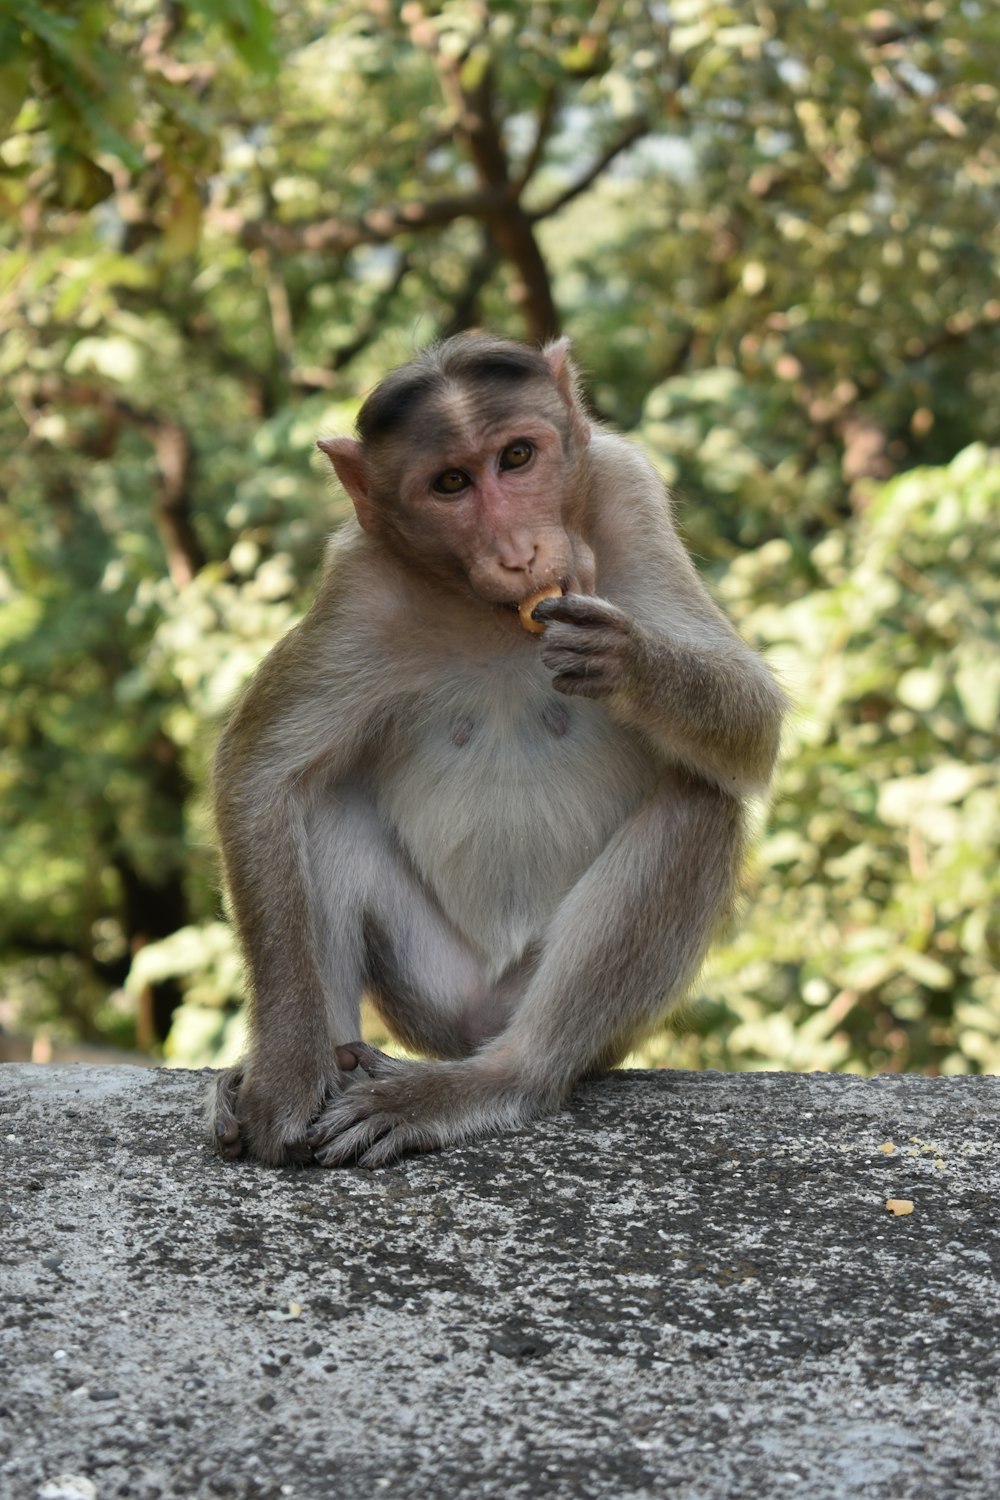 a monkey sitting on a rock eating something